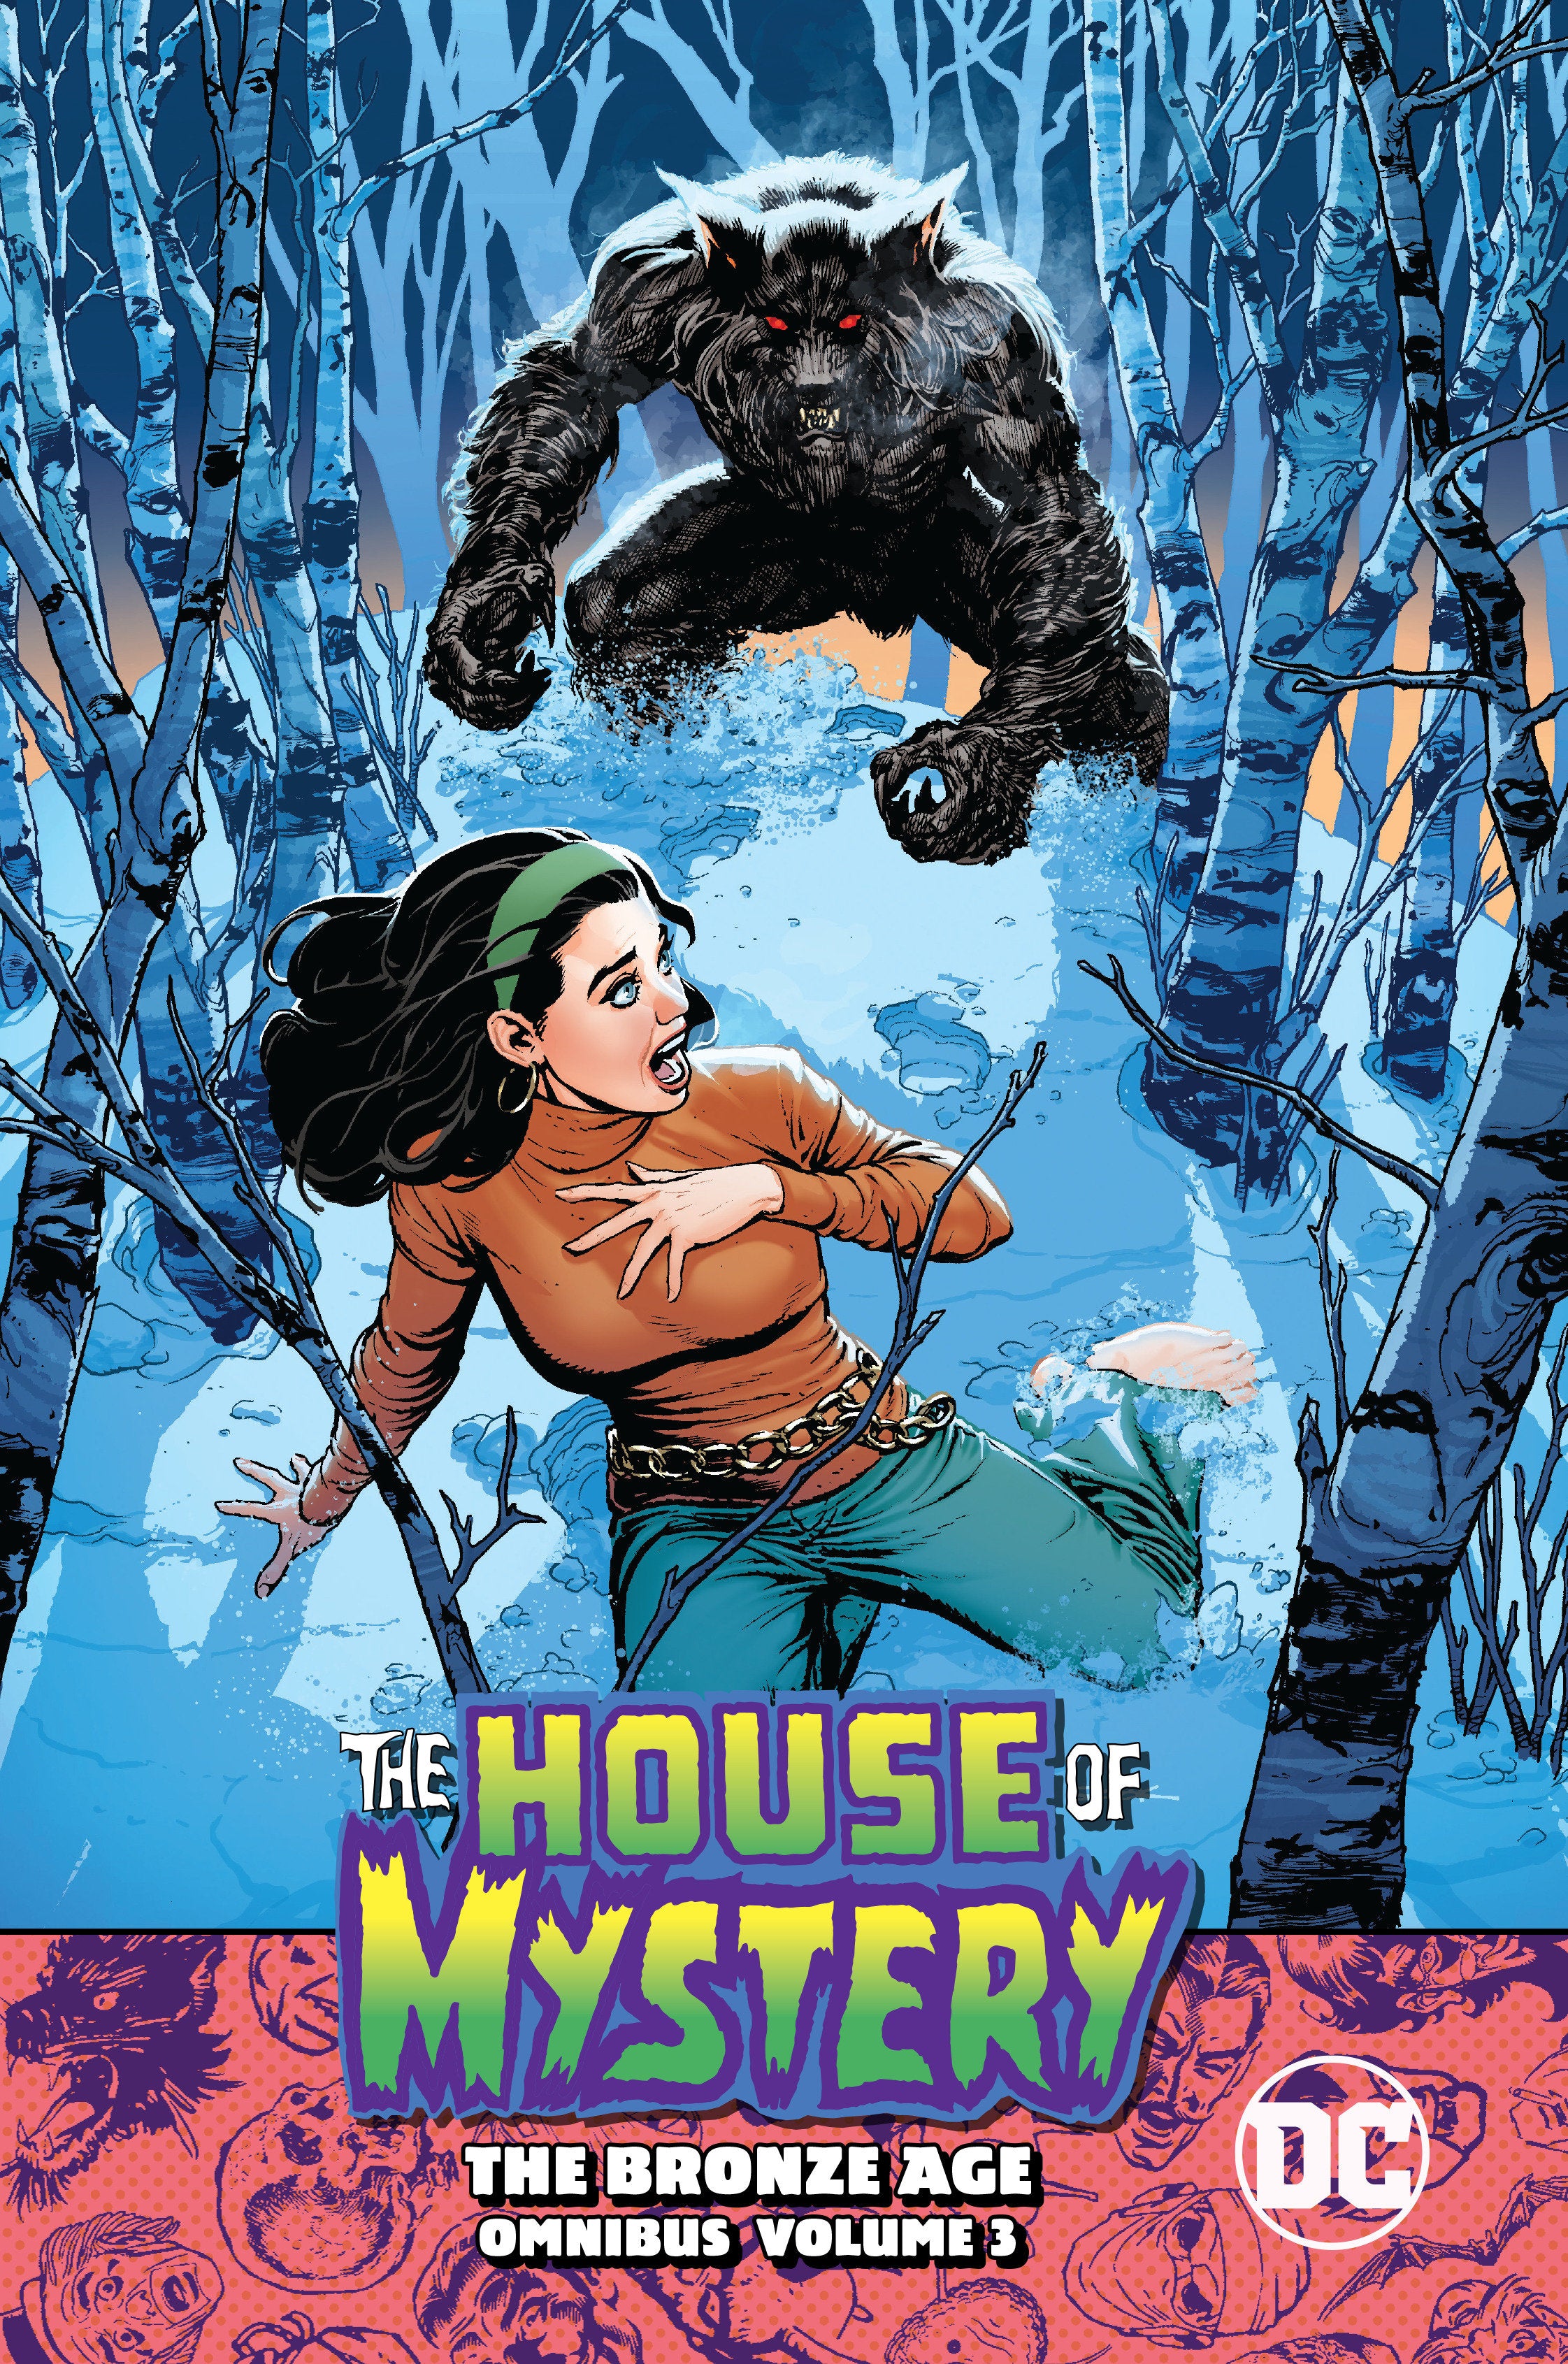 House of Mystery: The Bronze Age Omnibus Vol. 3 HC